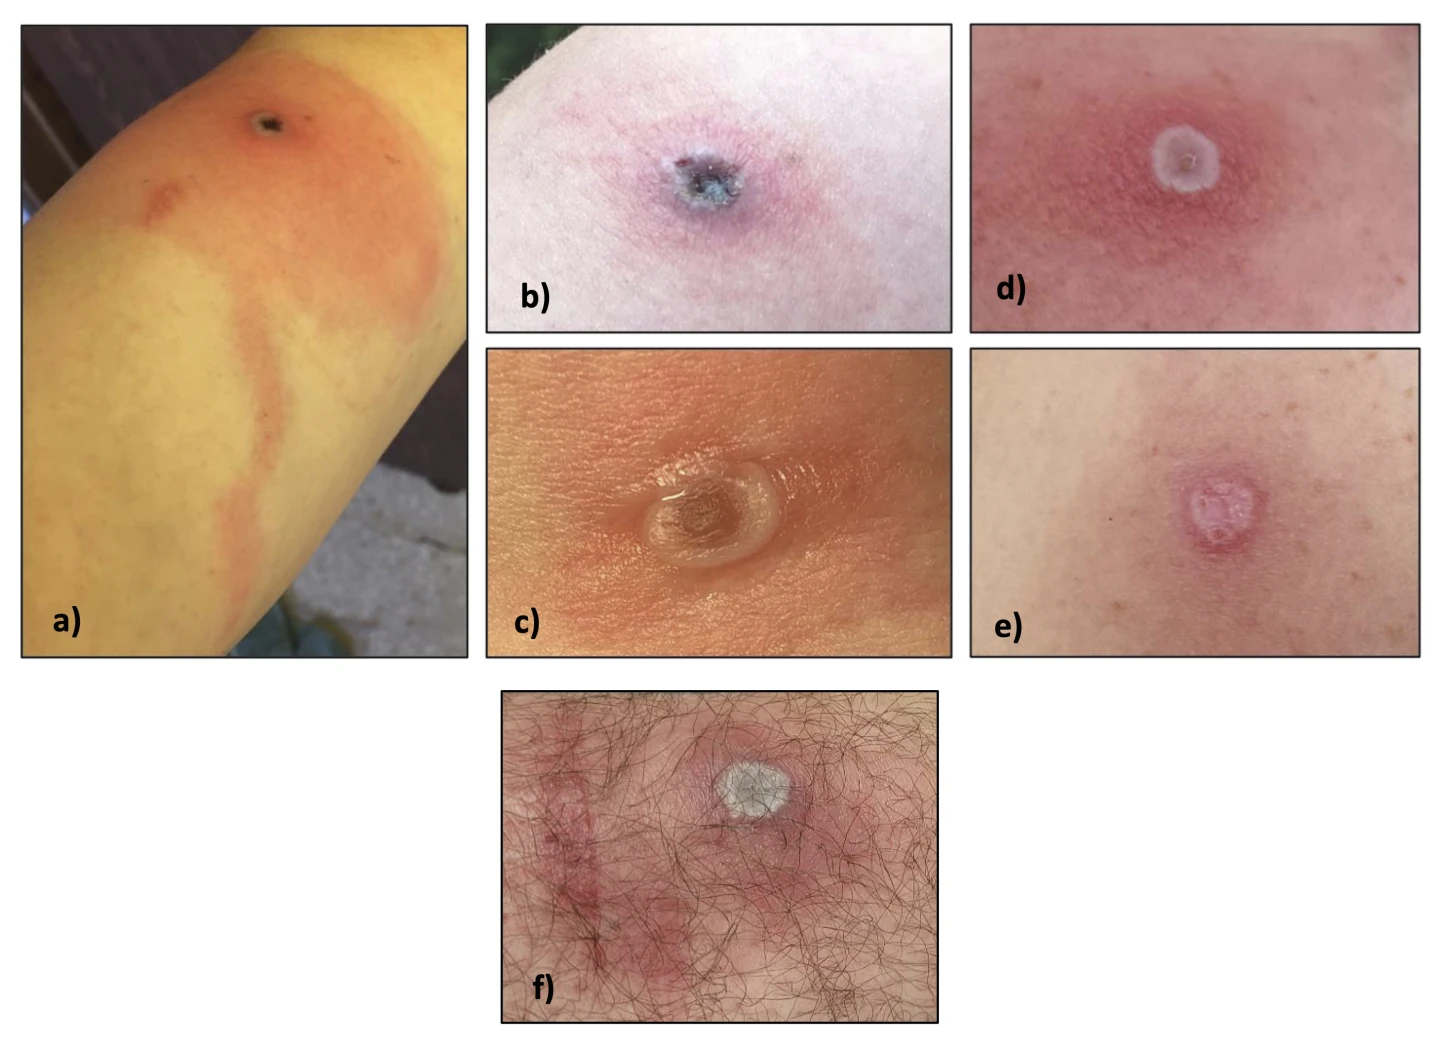 photos of lesions